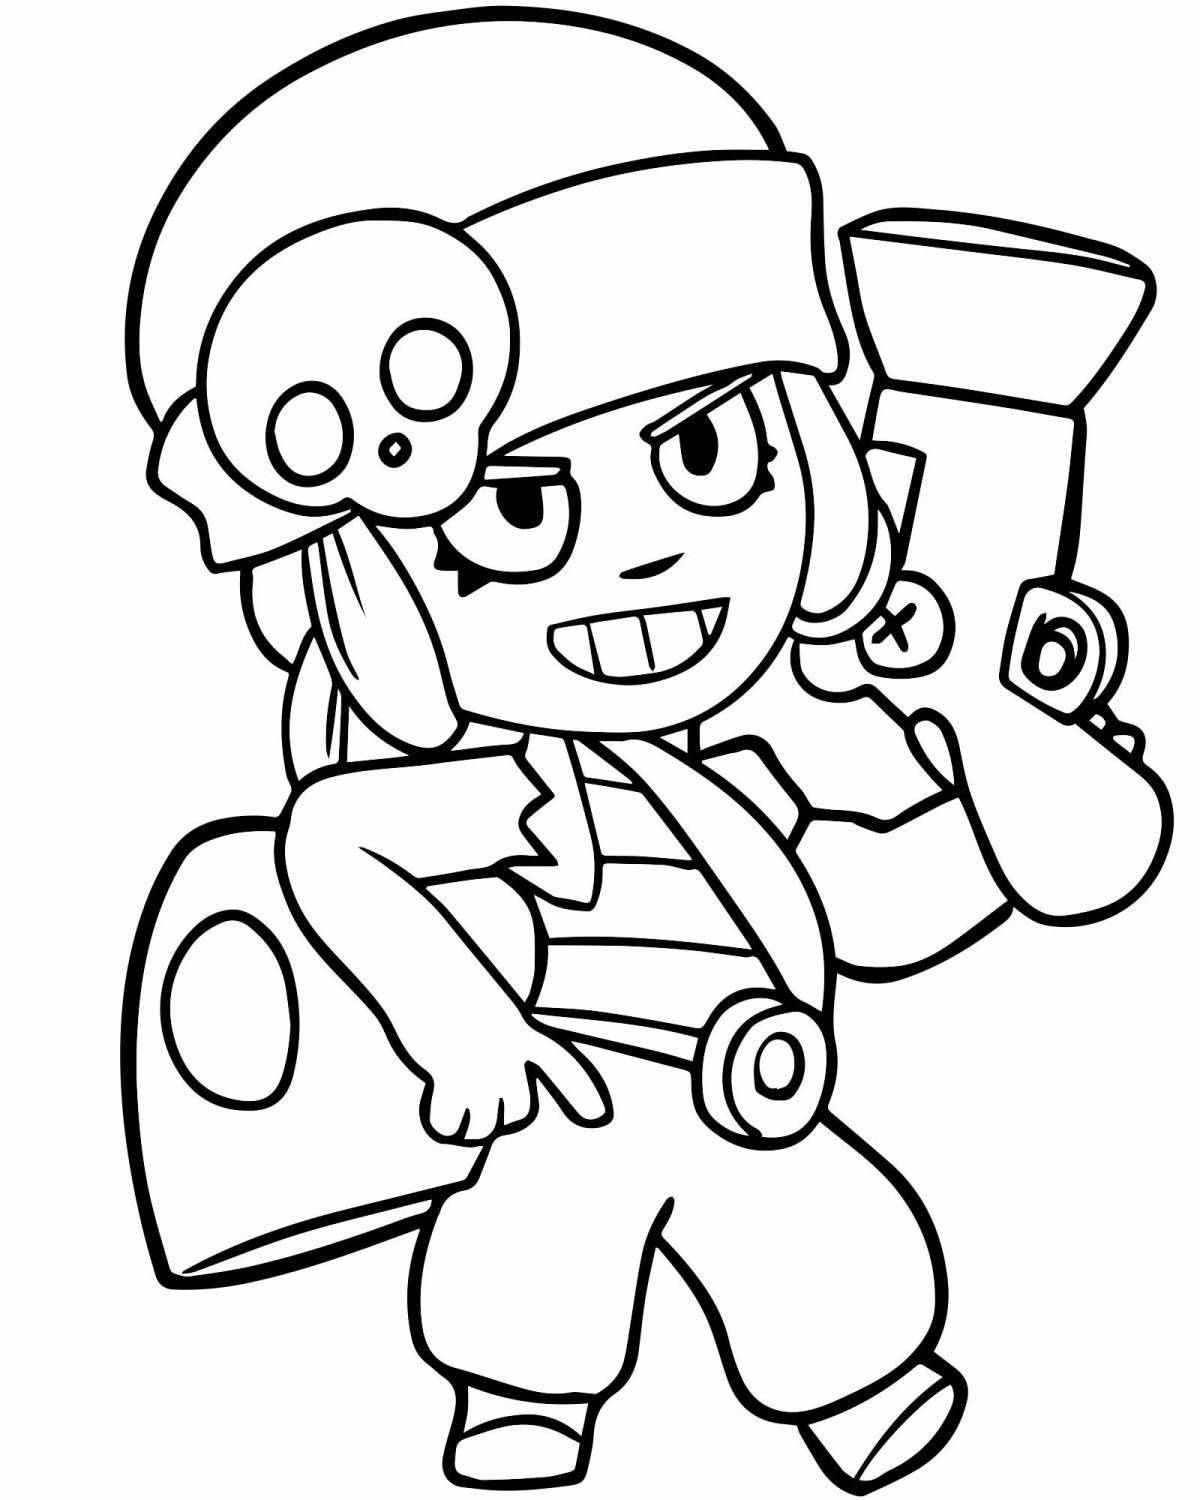 Sam's adorable coloring book from brawl stars